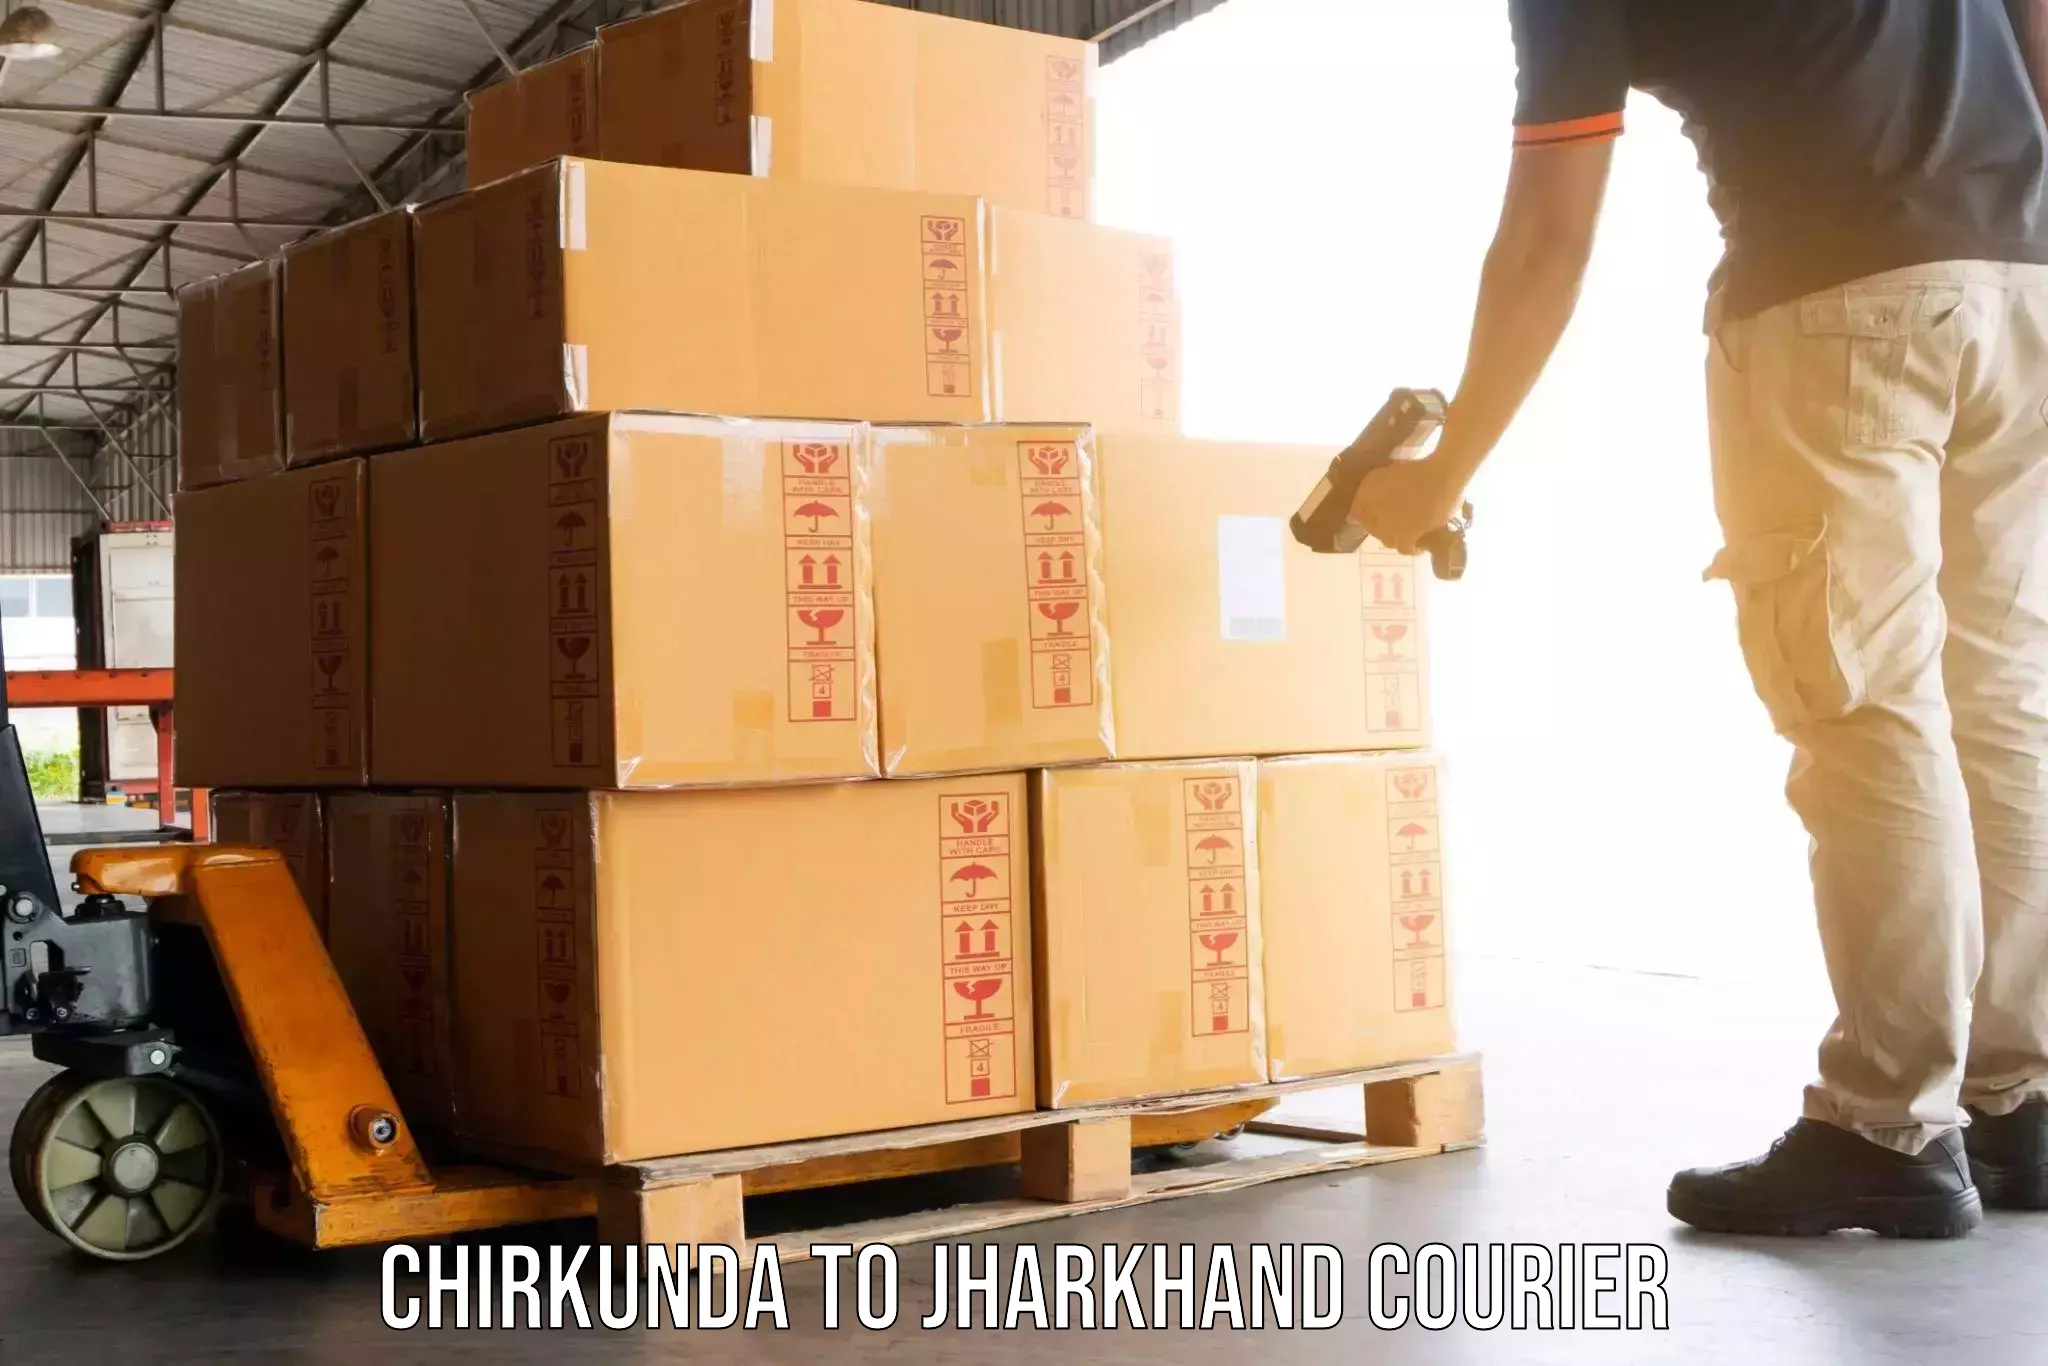 Trusted relocation experts Chirkunda to Jharkhand